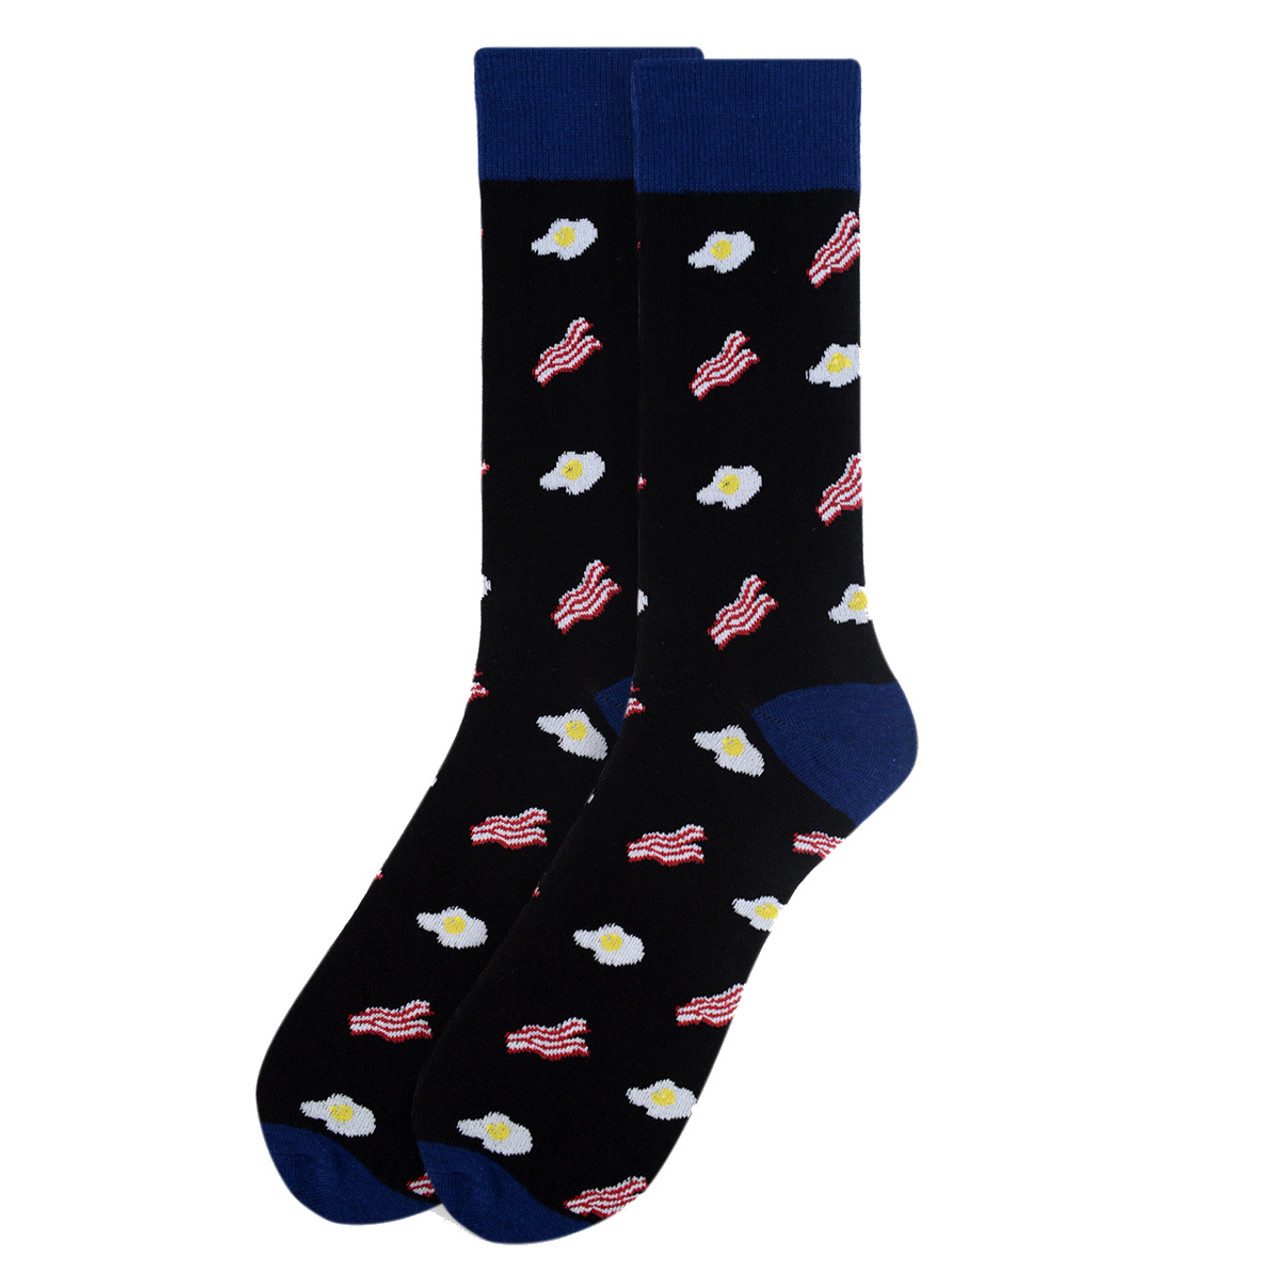 Bacon Socks - Comfy Cotton for Men & Women – Real Sic